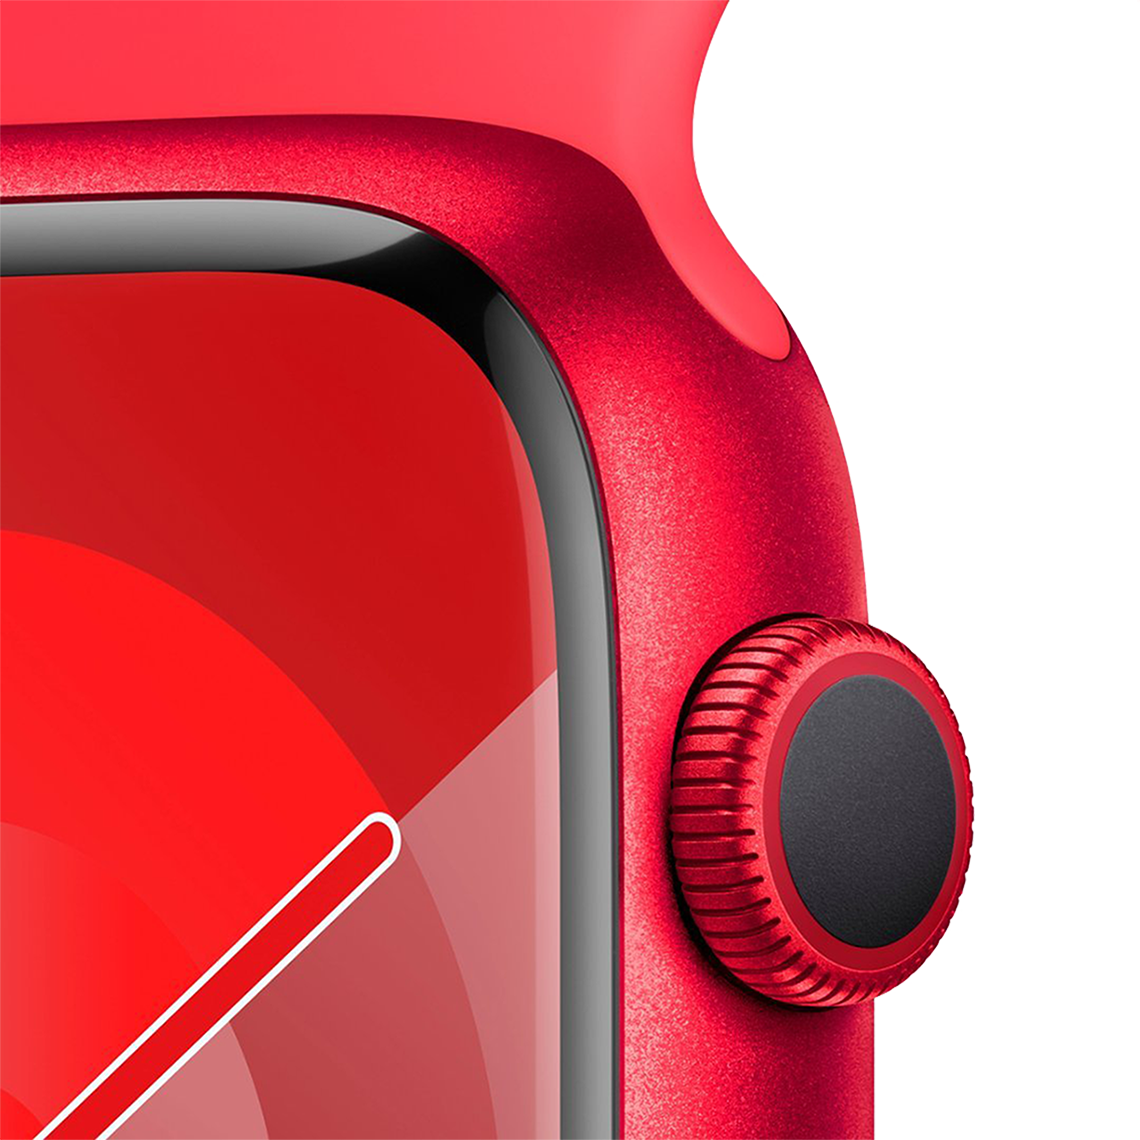 Apple Watch Series 9 45mm GPS - Product Red w/ M/L Red Sports Band, Grade B